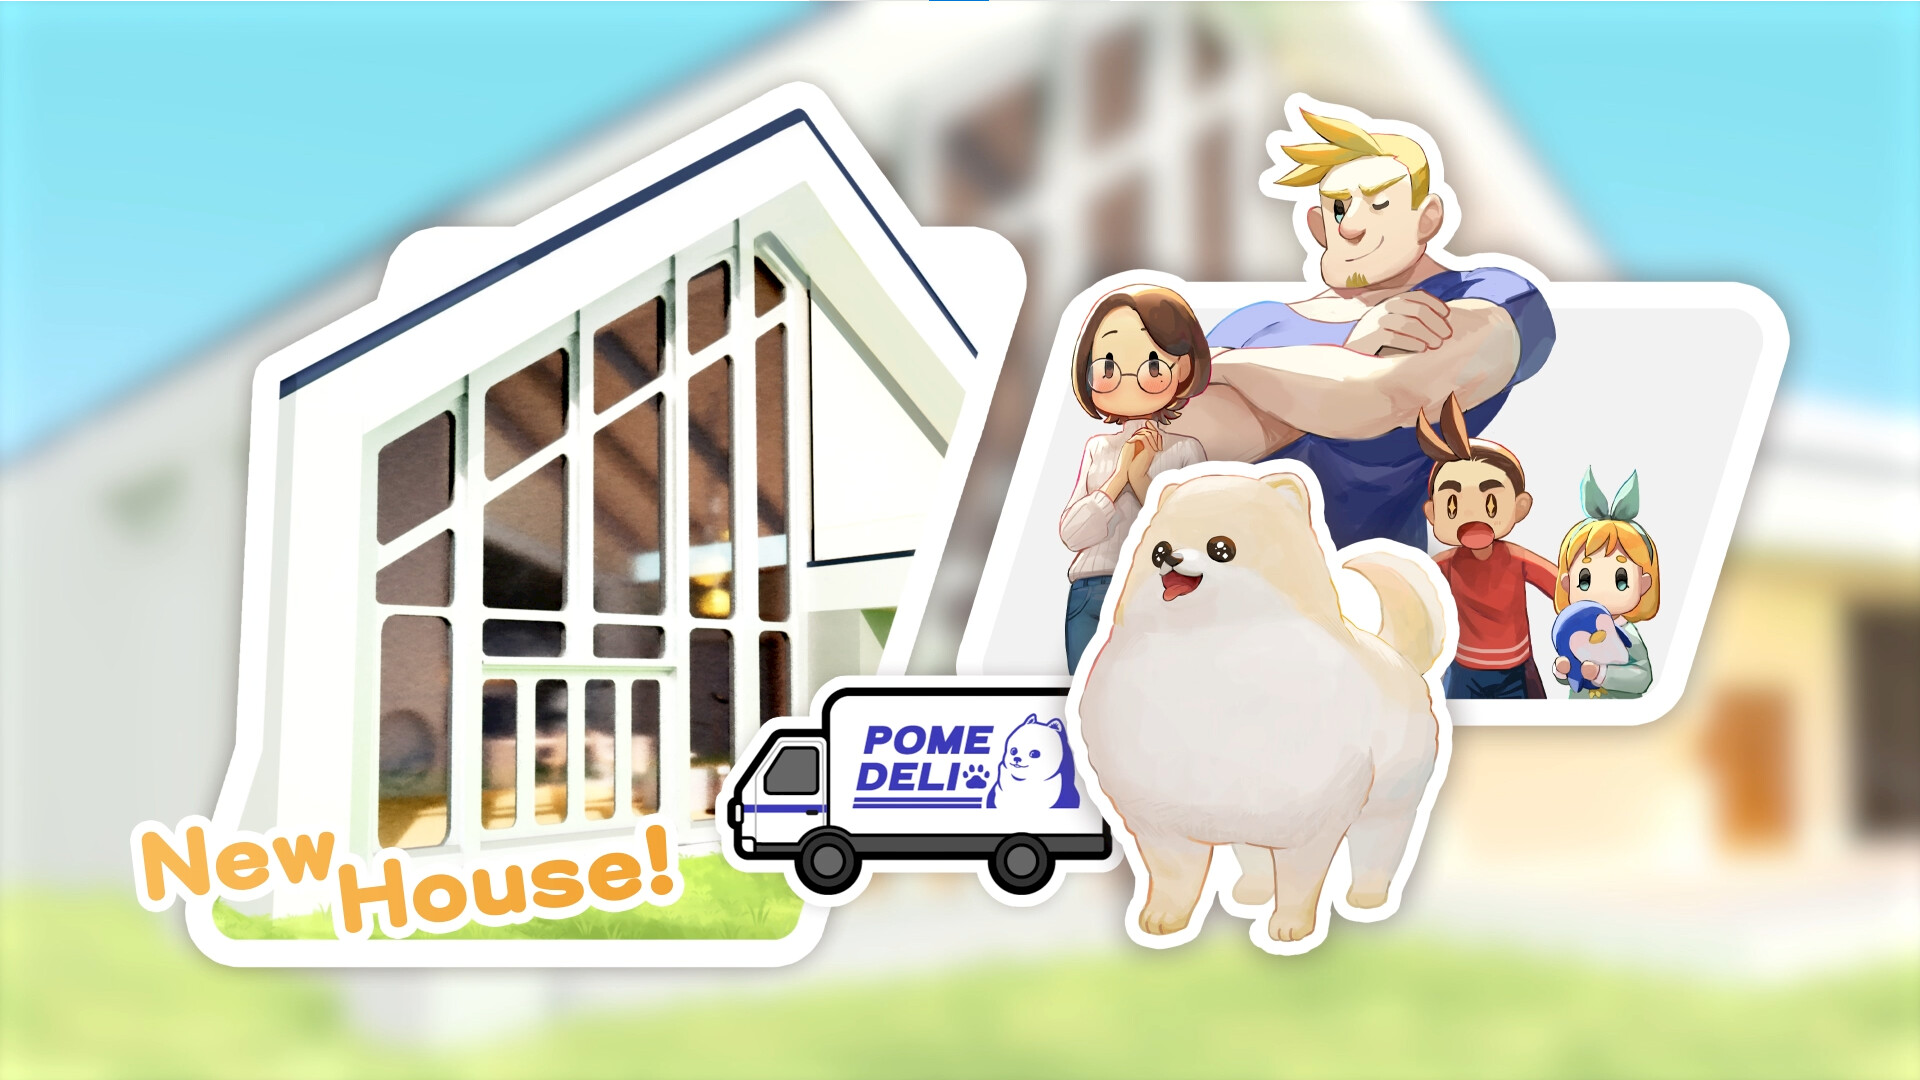 Bandai Namco drops three free games, including one where you’re a very messy dog ruining the house